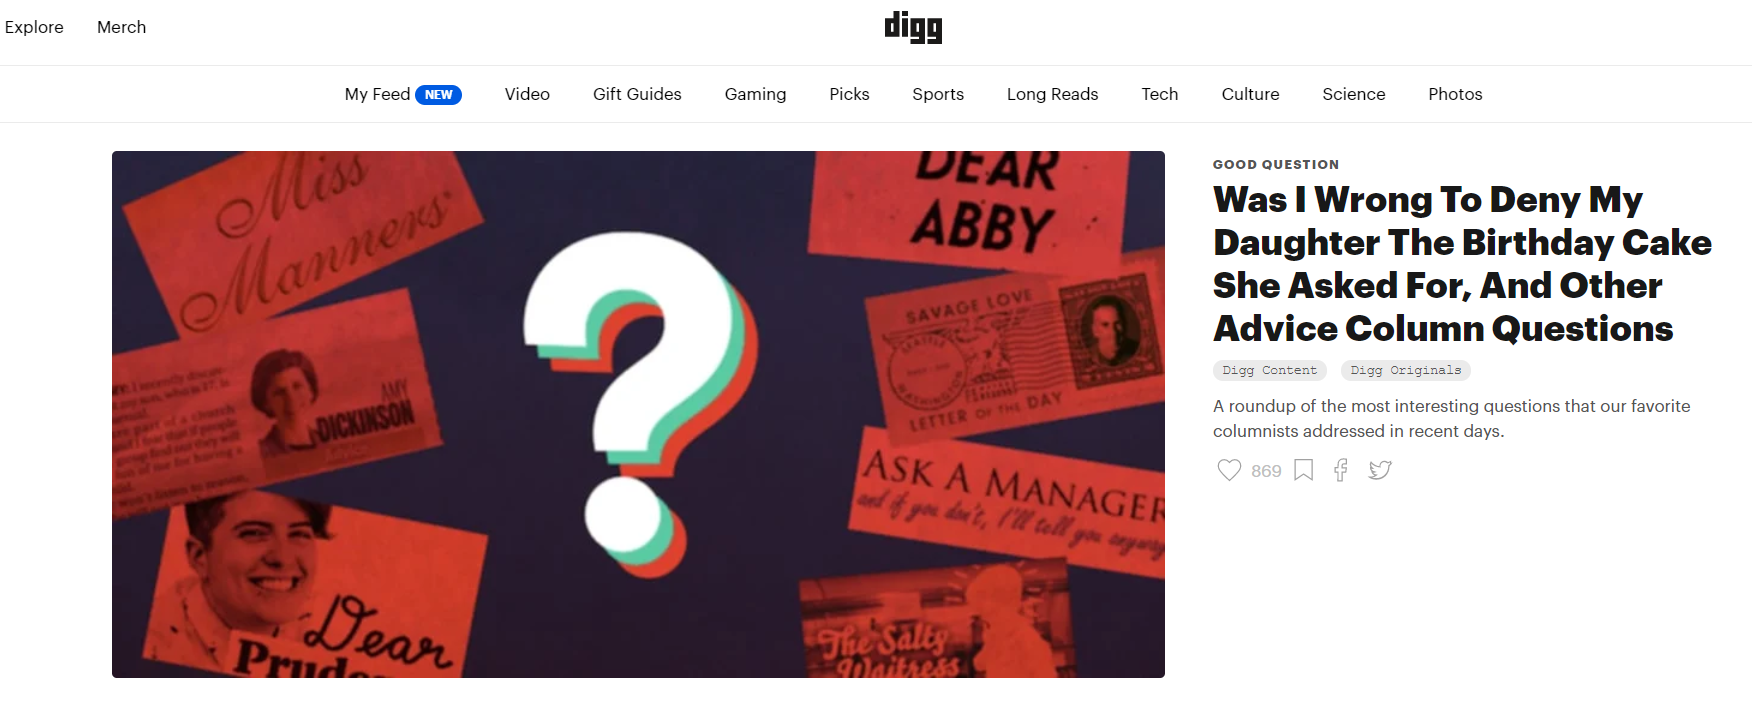 Digg-What-the-Internet-is-talking-about-right-now